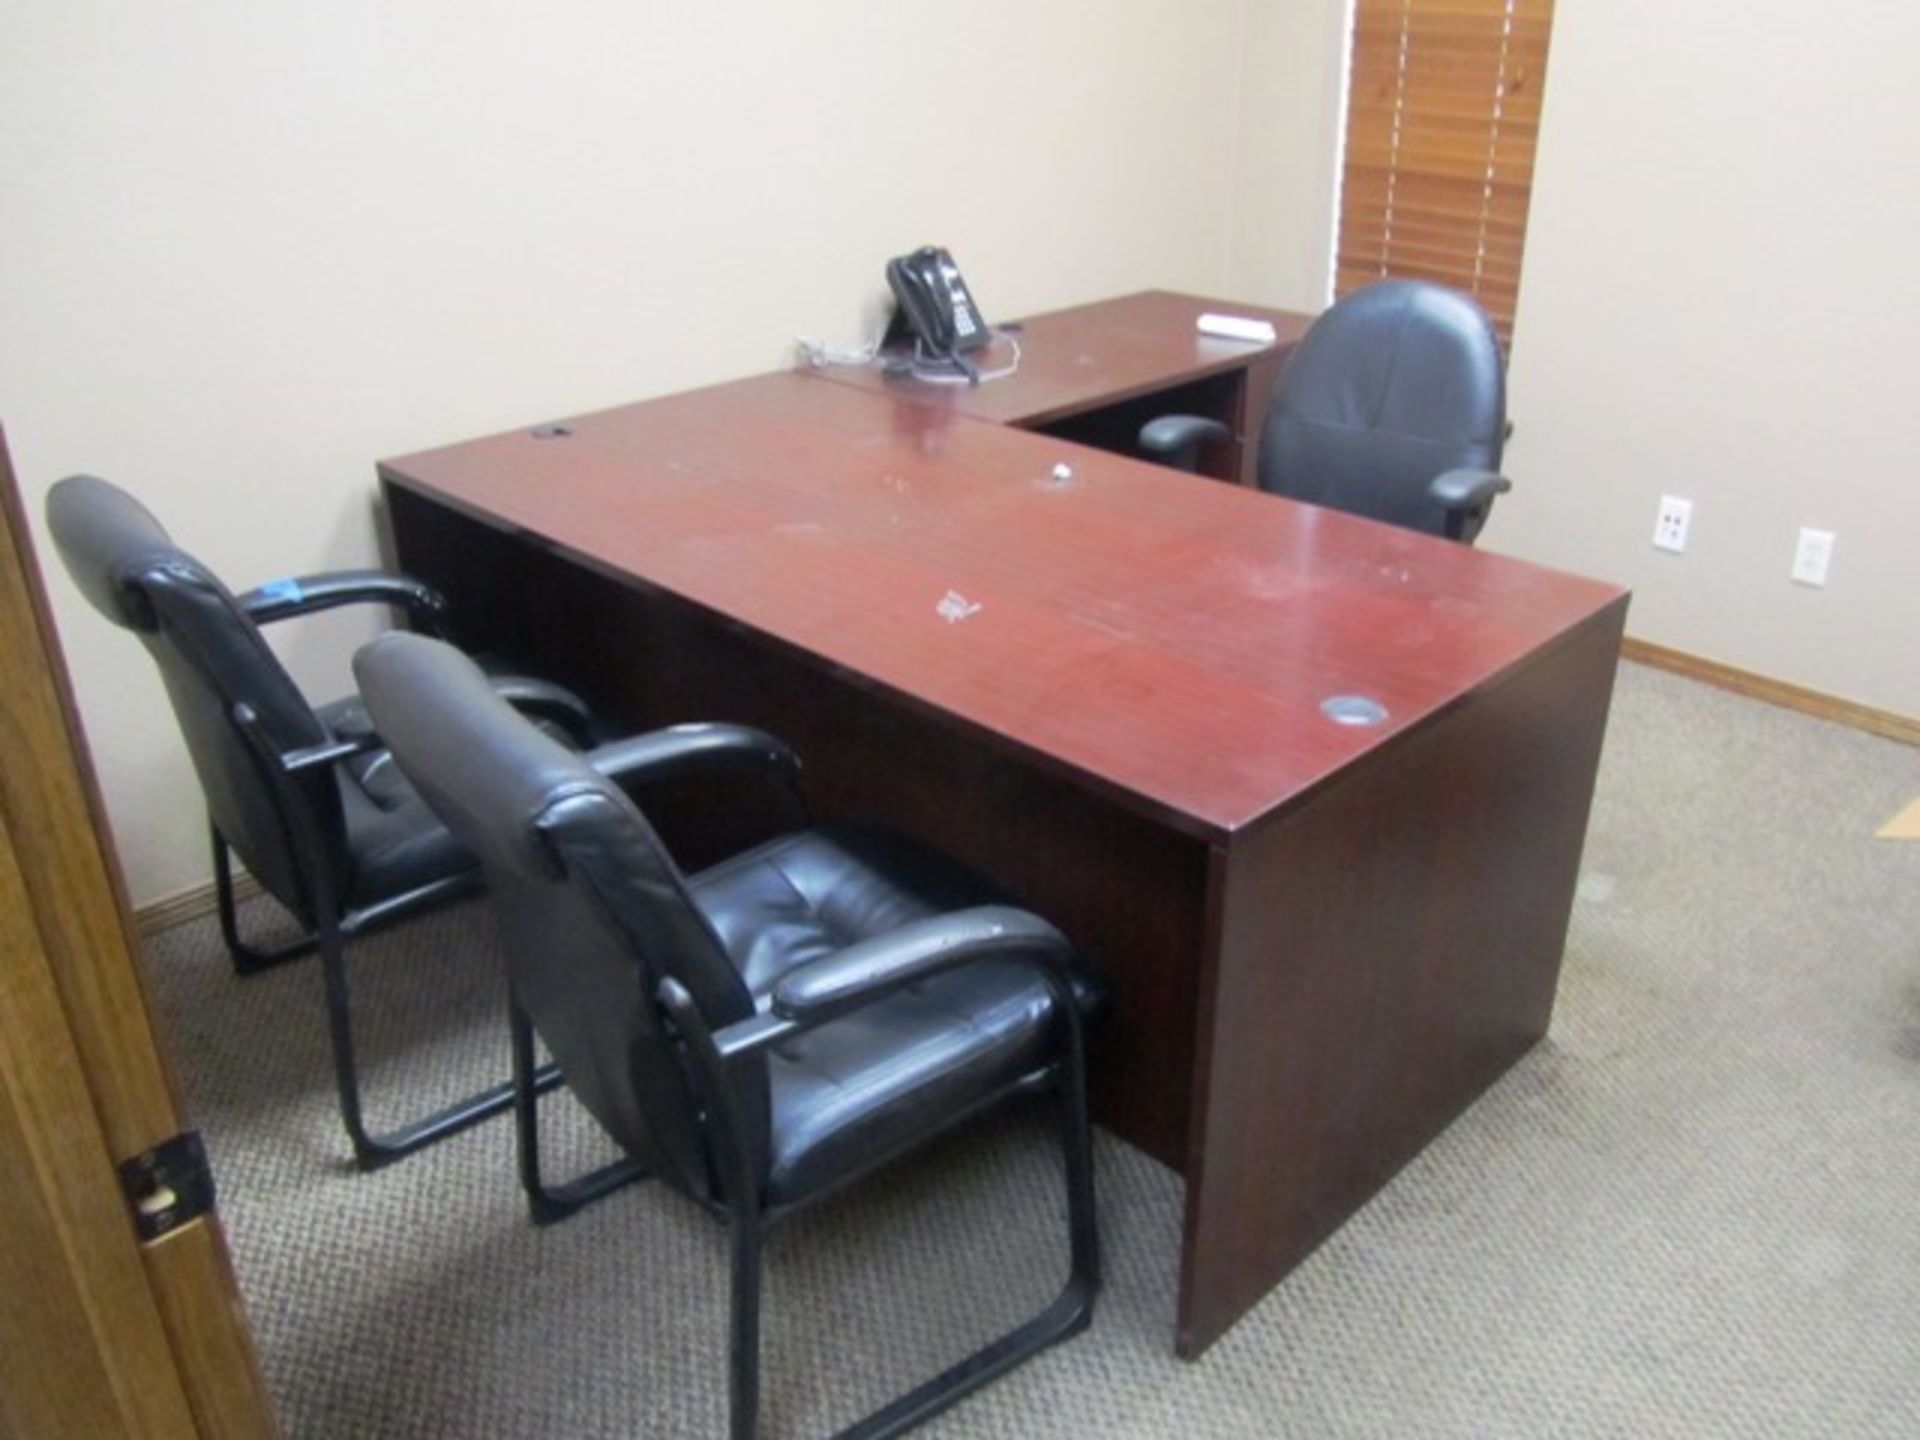 Contents of Office consisting of Desk with (3) Chairs